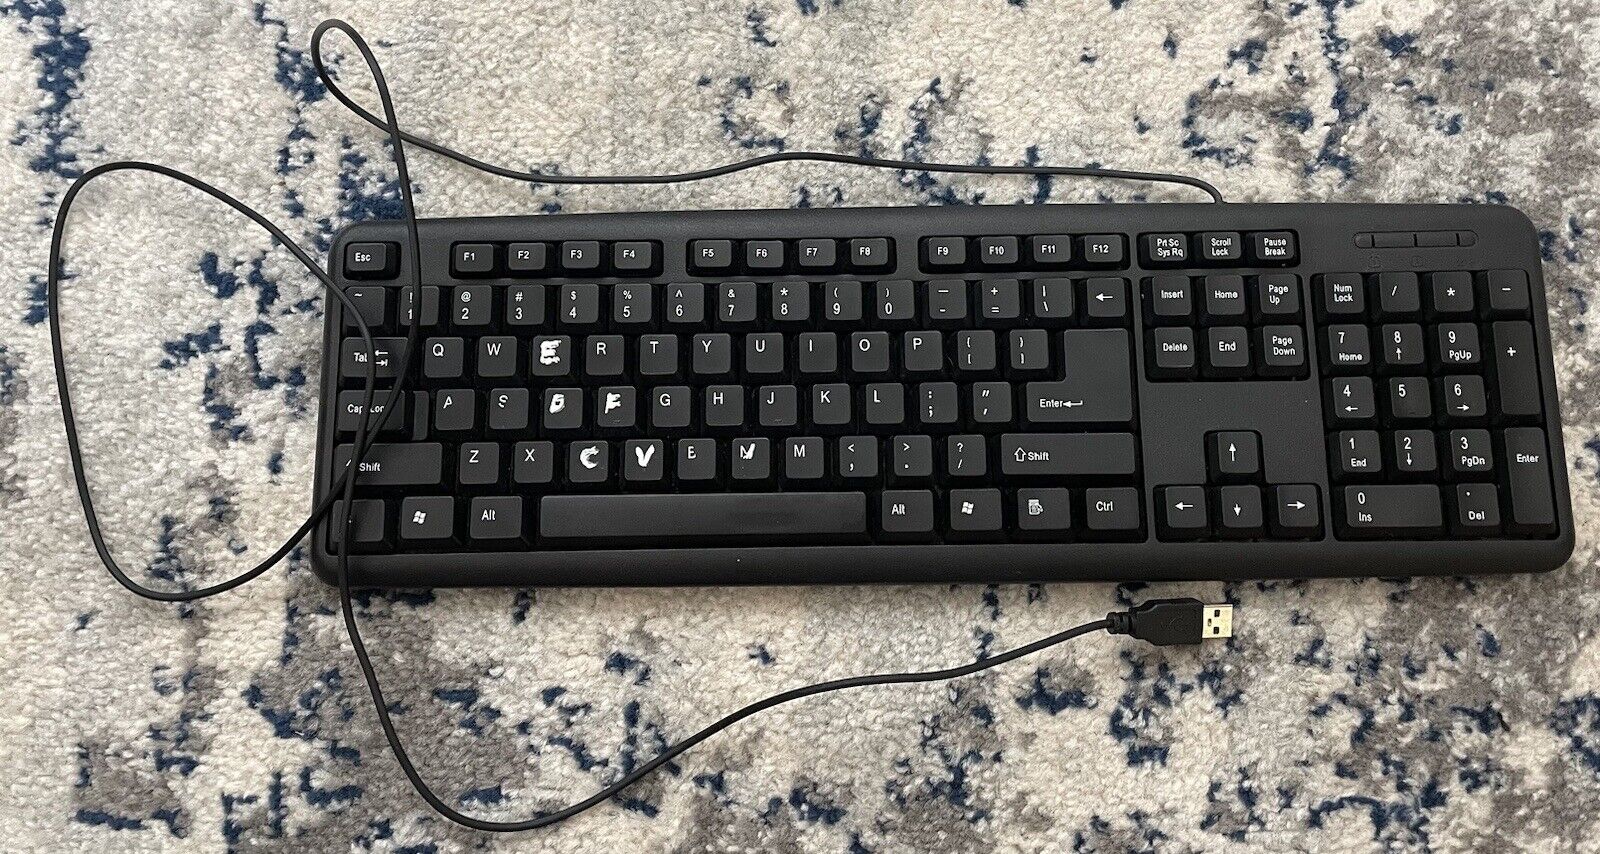 Black Wired Keyboard - 6 Highly Used Keys We’re Worn Down So White Out Was Used